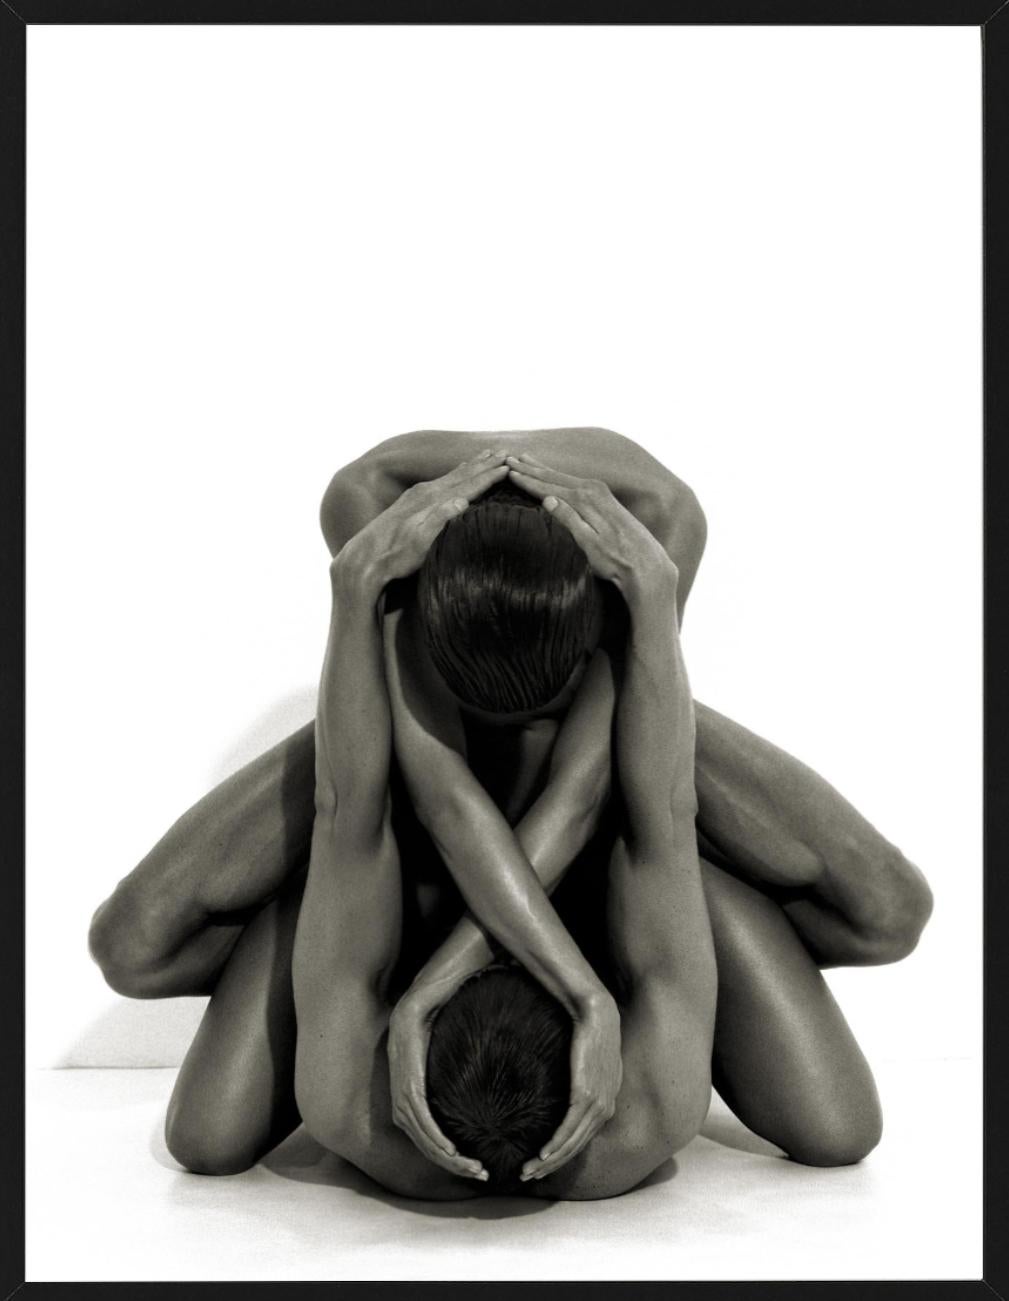 Yvonne & Tom, nude photograph of man and woman intertwined in embrace - Photograph by Andreas H. Bitesnich